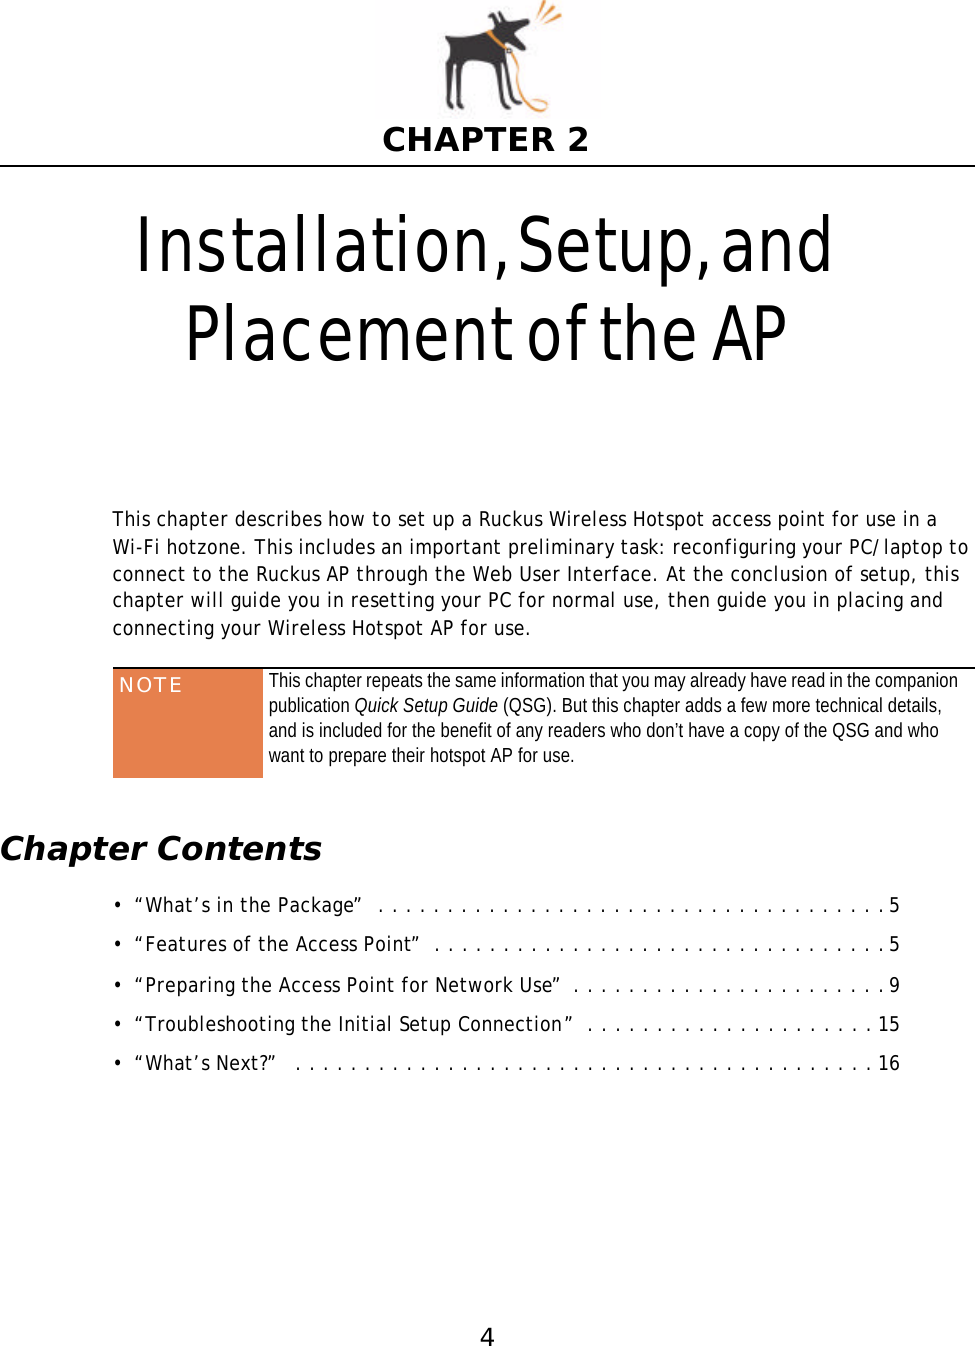 4CHAPTER 2Installation, Setup, and Placementof the APThis chapter describes how to set up a Ruckus Wireless Hotspot access point for use in aWi-Fi hotzone. This includes an important preliminary task: reconfiguring your PC/laptop to connect to the Ruckus AP through the Web User Interface. At the conclusion of setup, this chapter will guide you in resetting your PC for normal use, then guide you in placing and connecting your Wireless Hotspot AP for use. Chapter Contents• “What’s in the Package”  . . . . . . . . . . . . . . . . . . . . . . . . . . . . . . . . . . . . .5• “Features of the Access Point”  . . . . . . . . . . . . . . . . . . . . . . . . . . . . . . . . .5• “Preparing the Access Point for Network Use”  . . . . . . . . . . . . . . . . . . . . . . .9• “Troubleshooting the Initial Setup Connection”  . . . . . . . . . . . . . . . . . . . . . 15• “What’s Next?”   . . . . . . . . . . . . . . . . . . . . . . . . . . . . . . . . . . . . . . . . . . 16NOTE This chapter repeats the same information that you may already have read in the companion publication Quick Setup Guide (QSG). But this chapter adds a few more technical details, and is included for the benefit of any readers who don’t have a copy of the QSG and who want to prepare their hotspot AP for use.